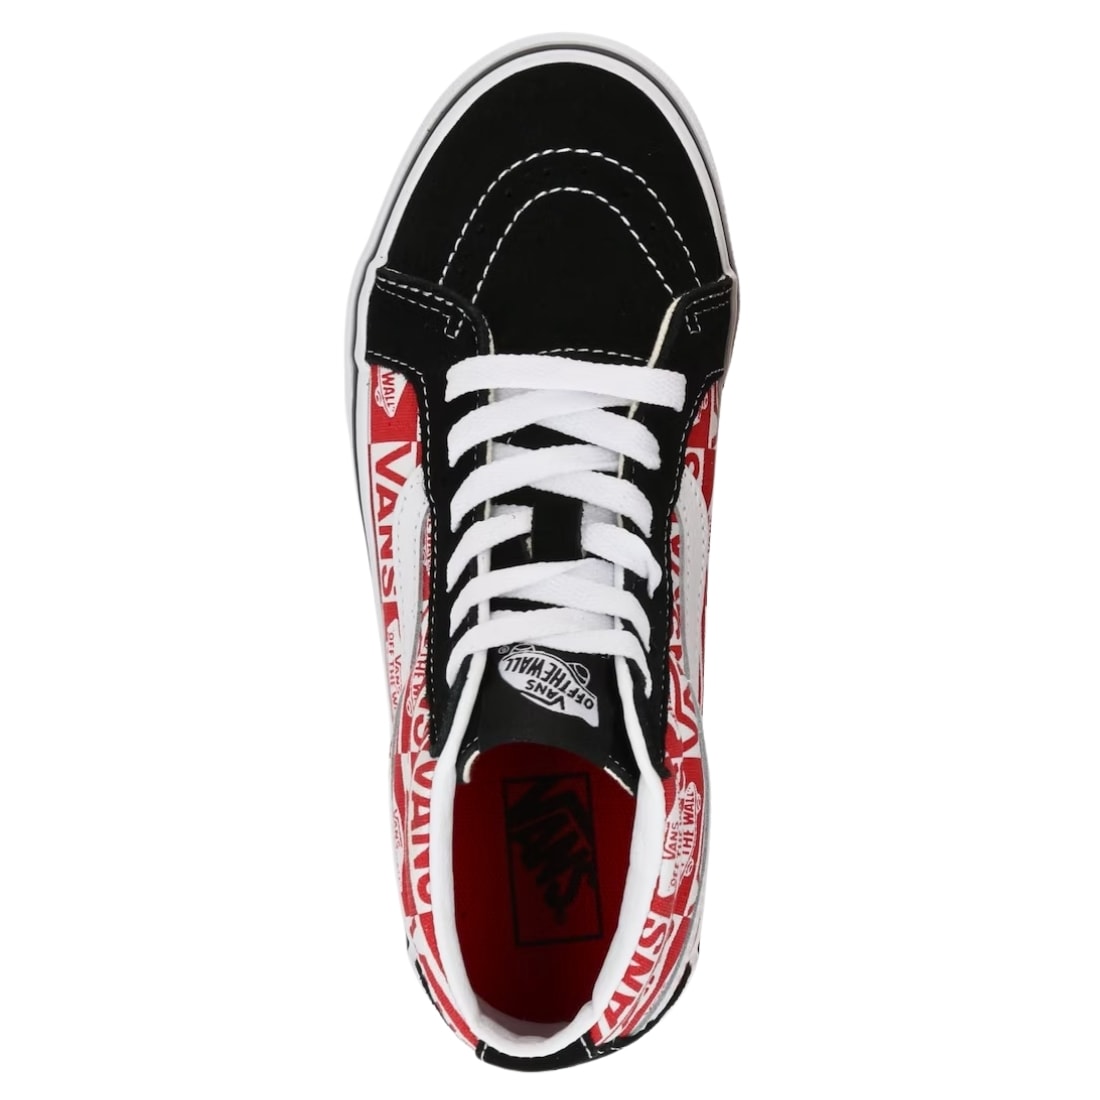 Vans Kids Sk8Mid Reissue V Shoes - Logo/Blk/Red - Boys High Top Trainers by Vans